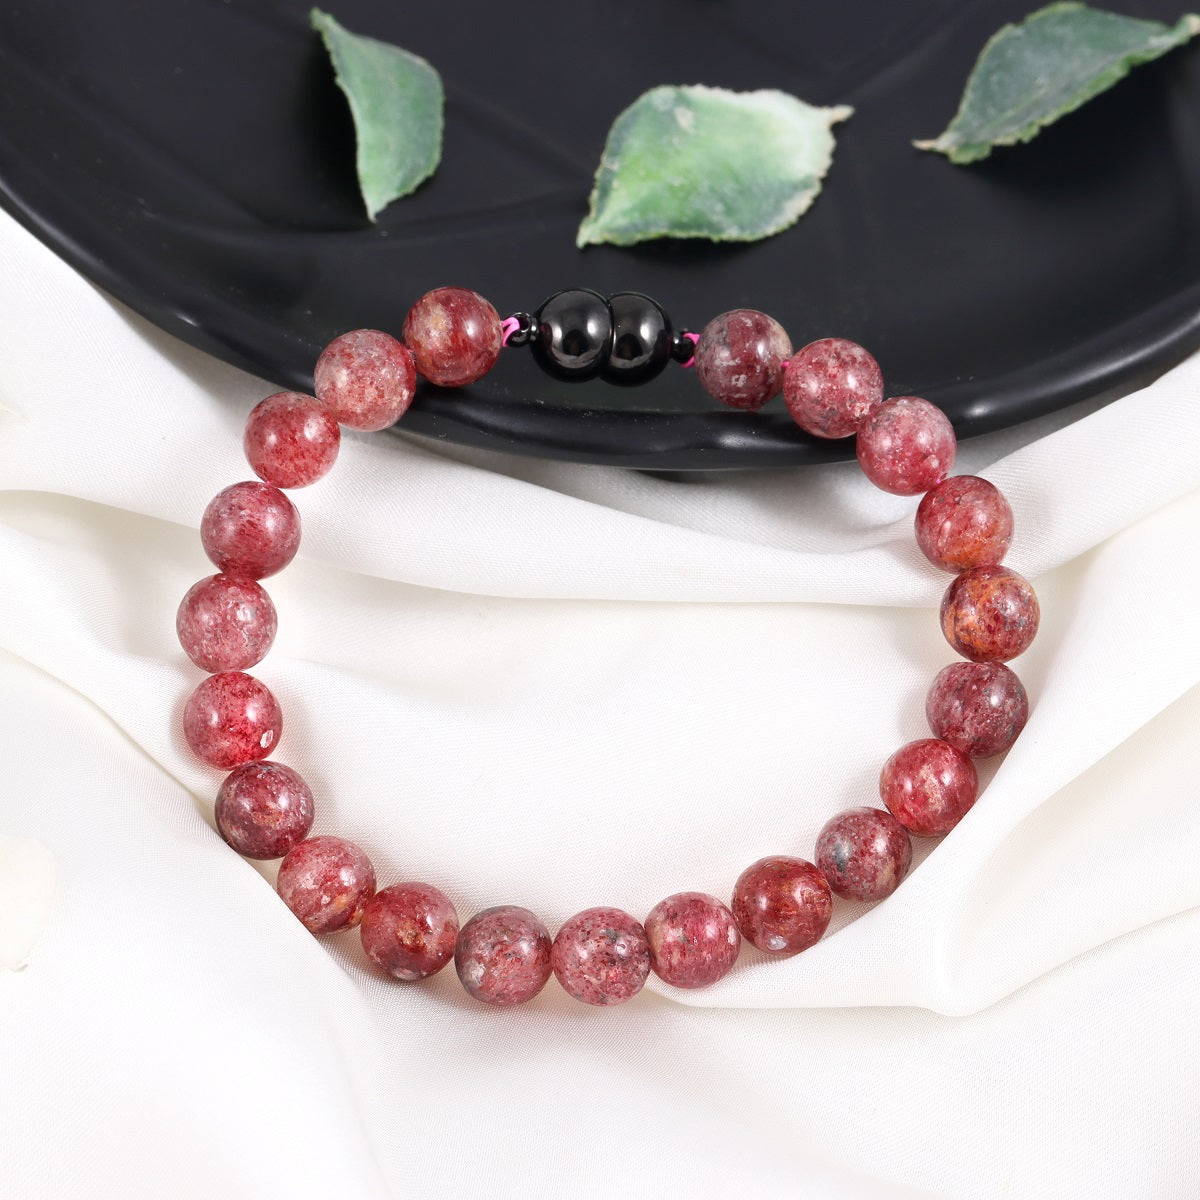 An image featuring the strawberry quartz gemstones alongside keywords like love, emotional healing, and compassion, symbolizing their metaphysical properties.